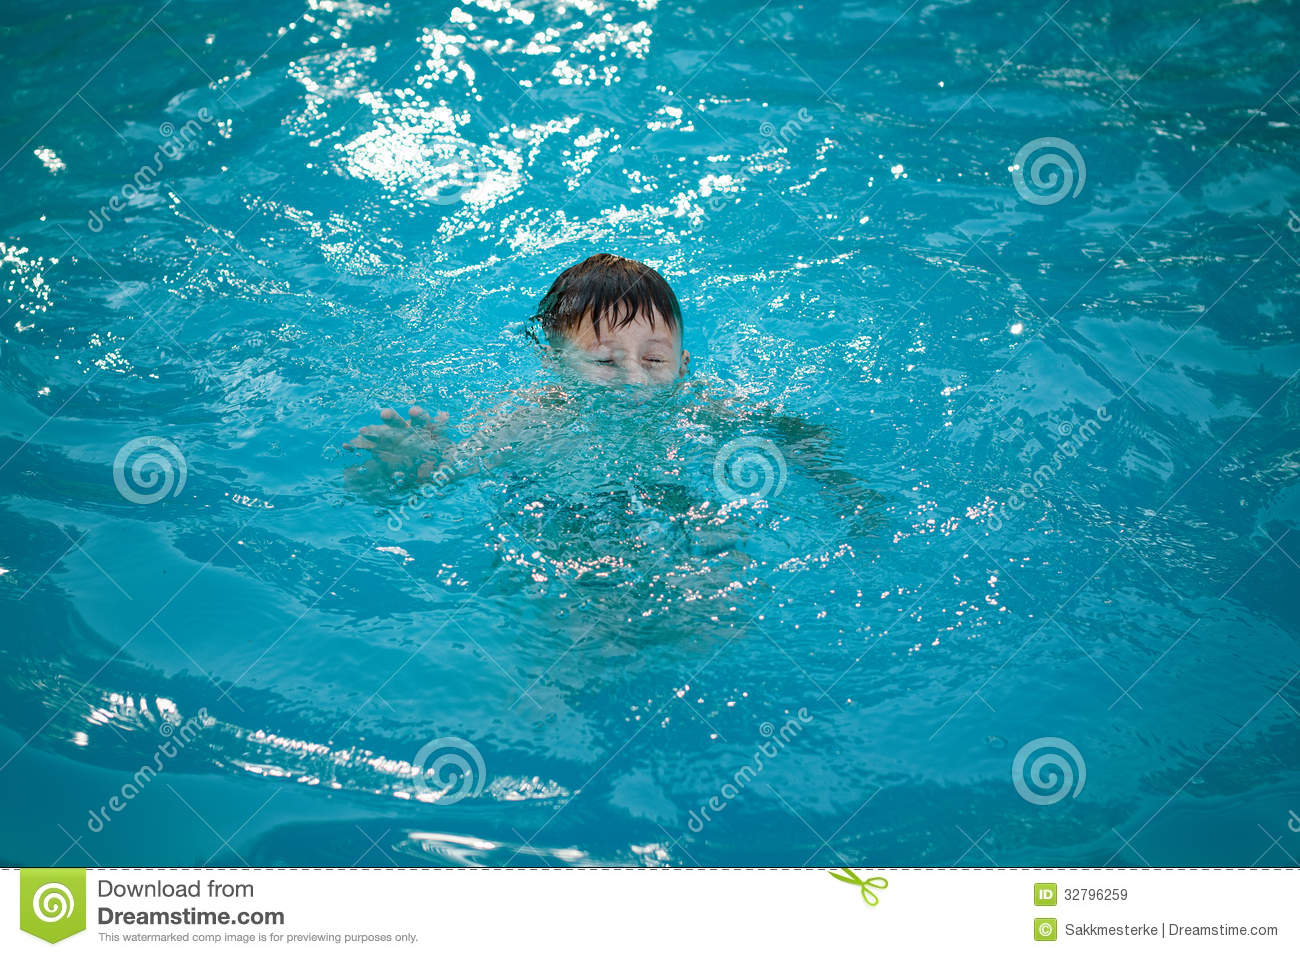 Royalty Free Stock Images  Young Boy Drowning In The Pool